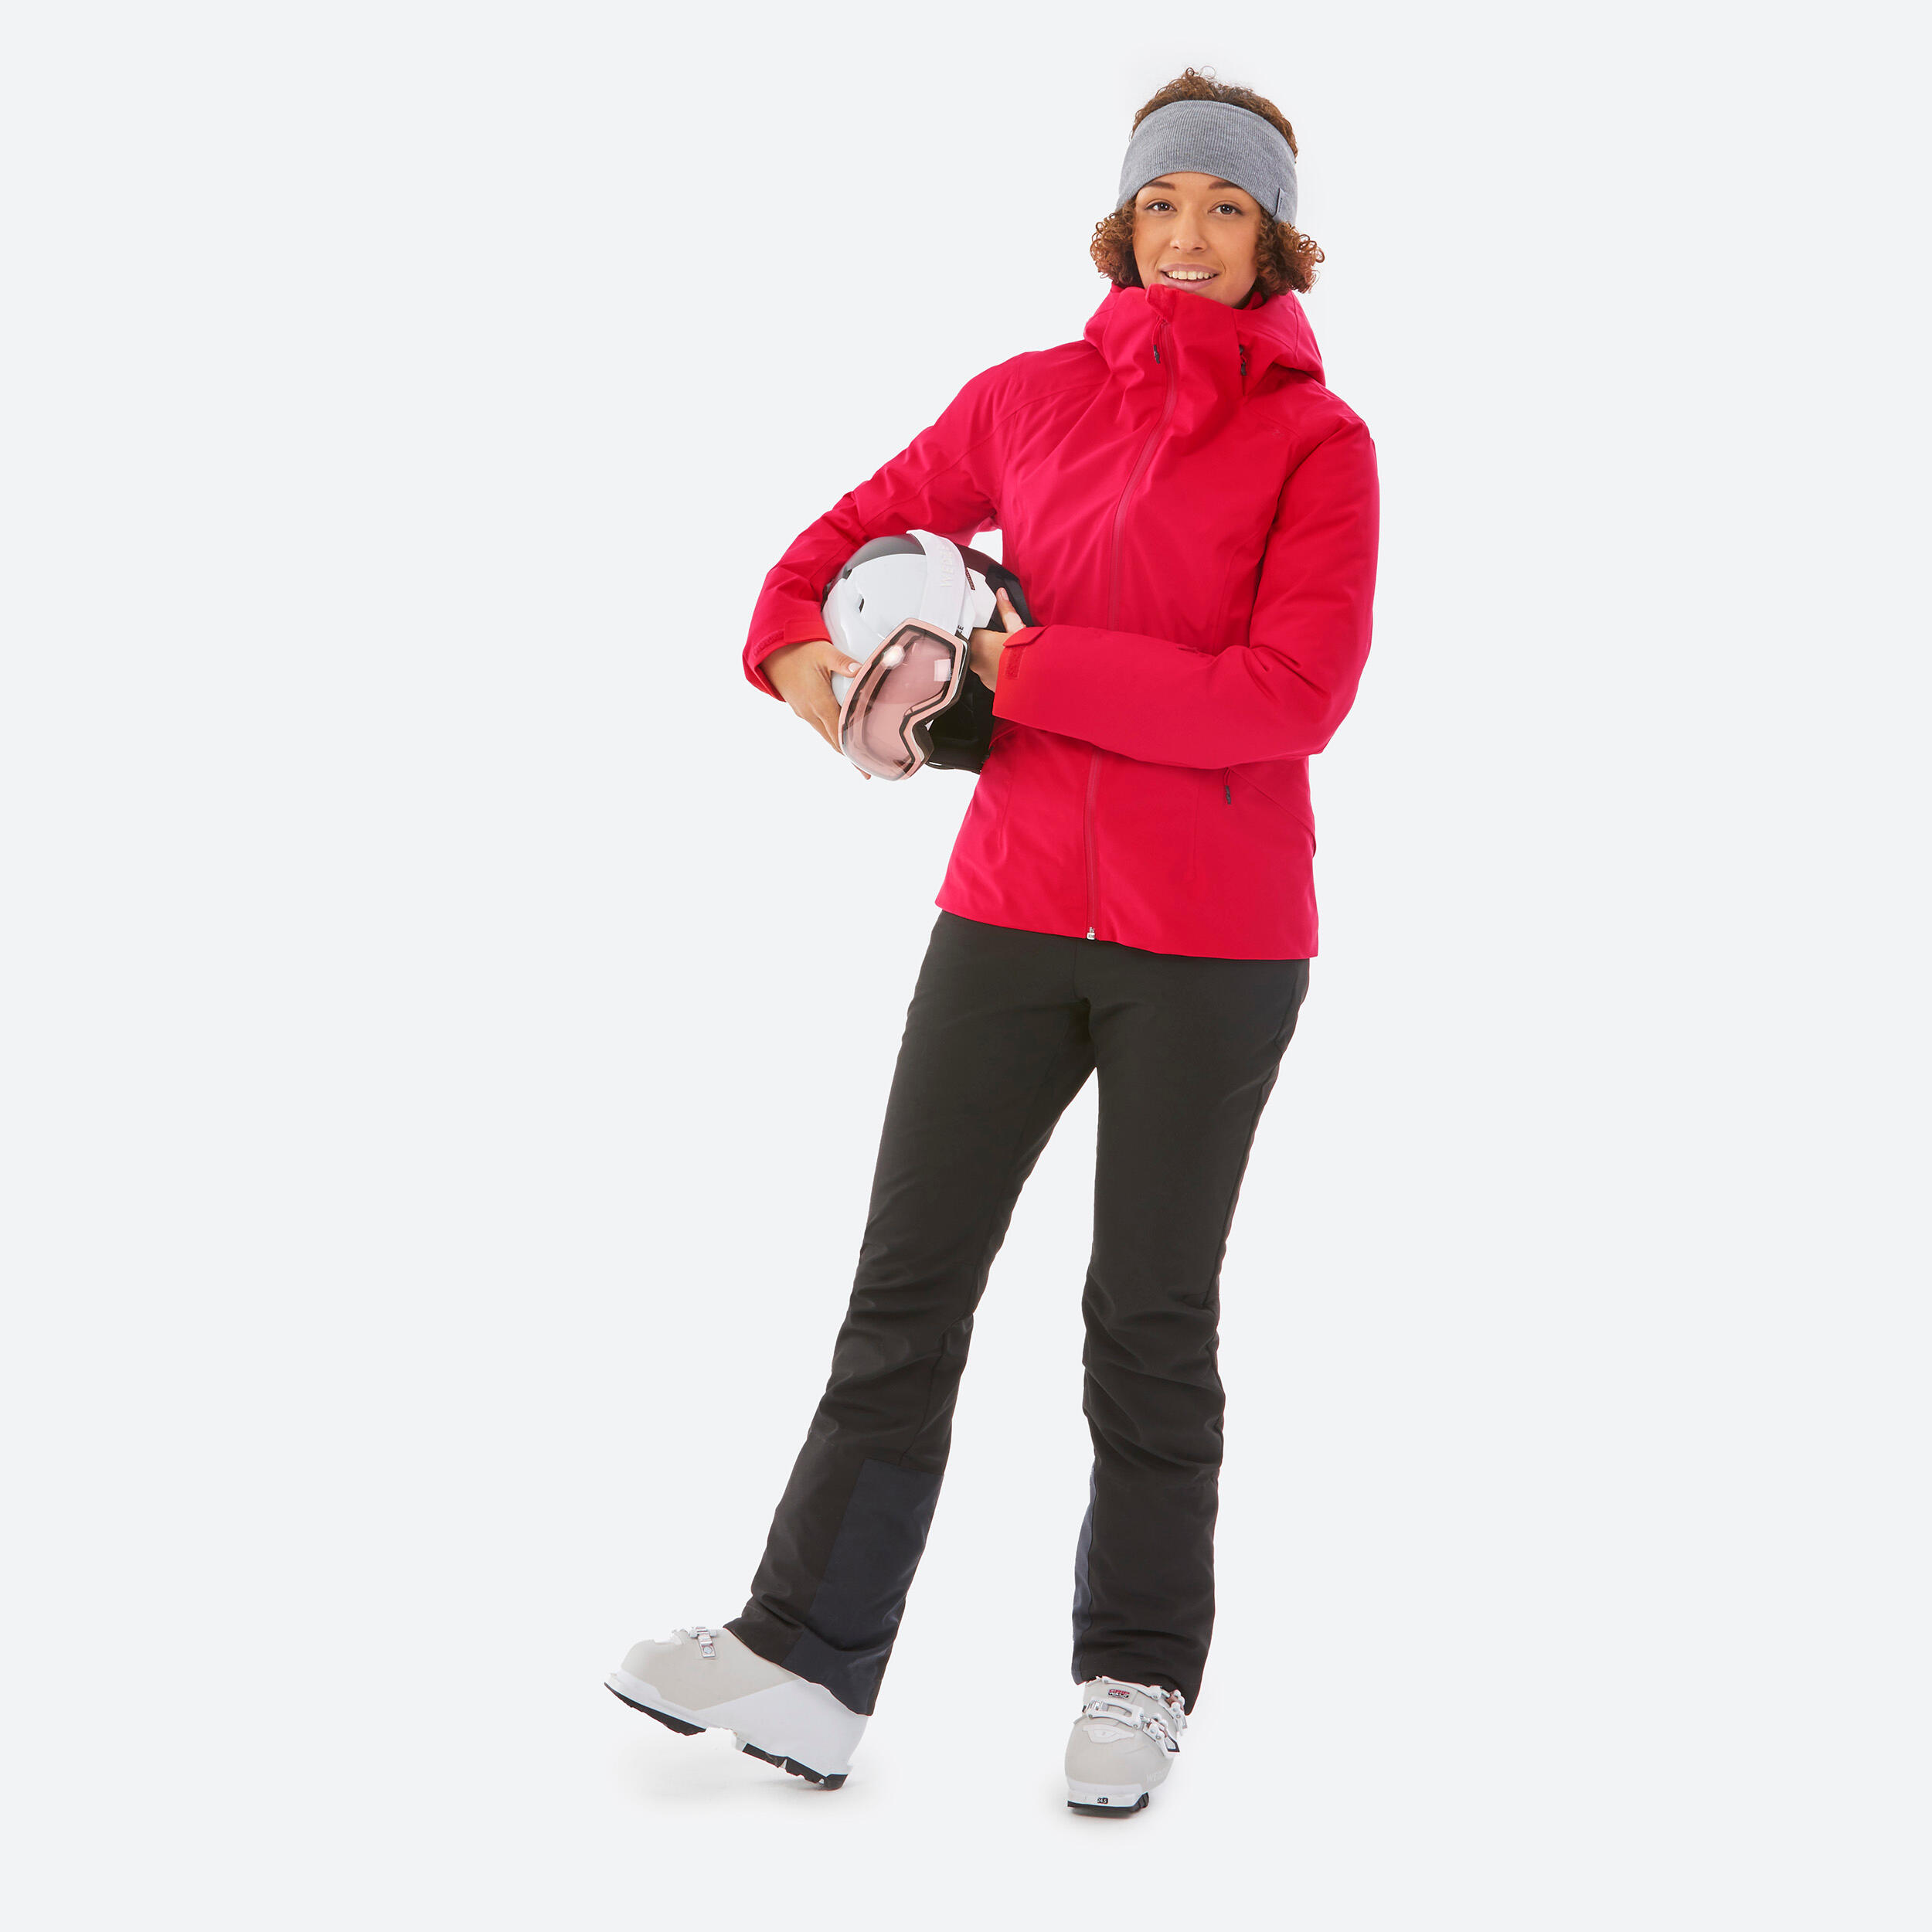 MISSGUIDED red ski jacket with mittens and bumbag – winter sports